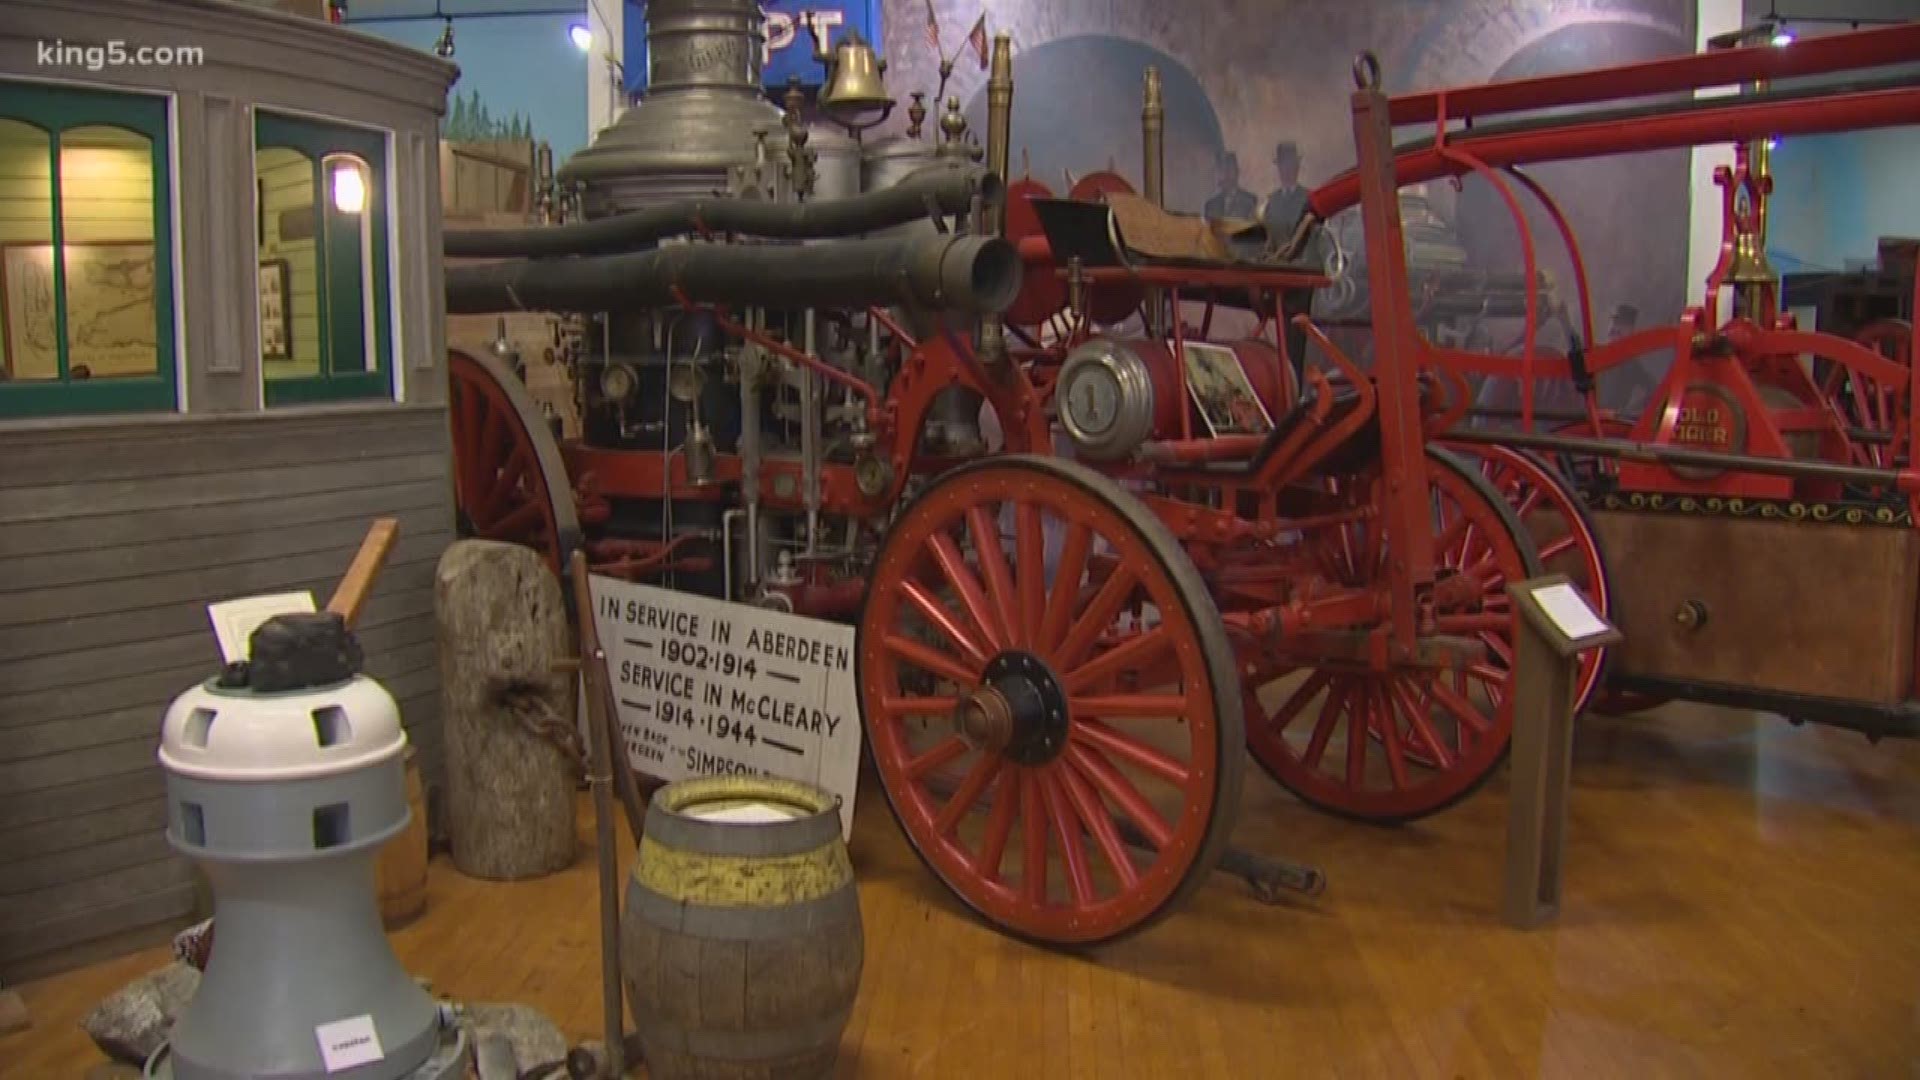 Supporters are looking for a new site for an Aberdeen museum to showcase items salvaged from a 2018 fire. KING 5's Drew Mikkelsen reports.